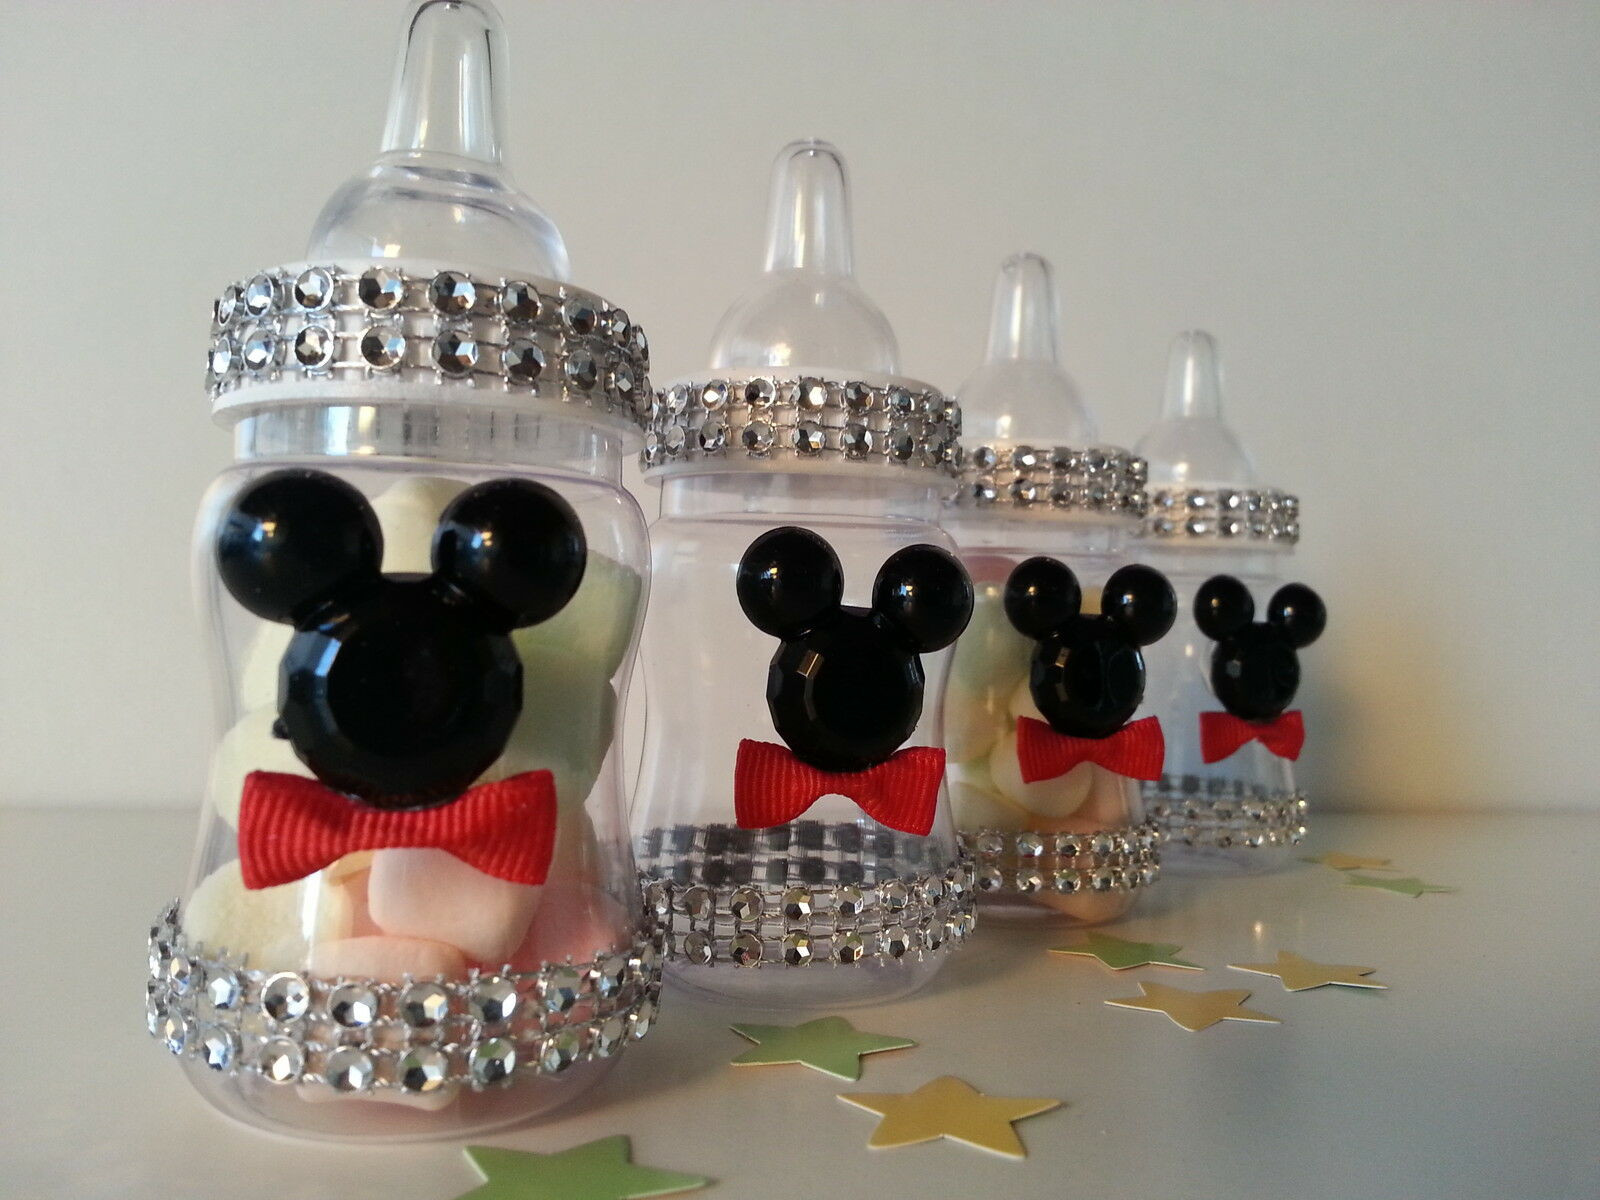 Mickey Mouse Baby Shower Decorations Ideas
 12 Mickey Mouse Fillable Blocks Baby Shower Favors Prizes